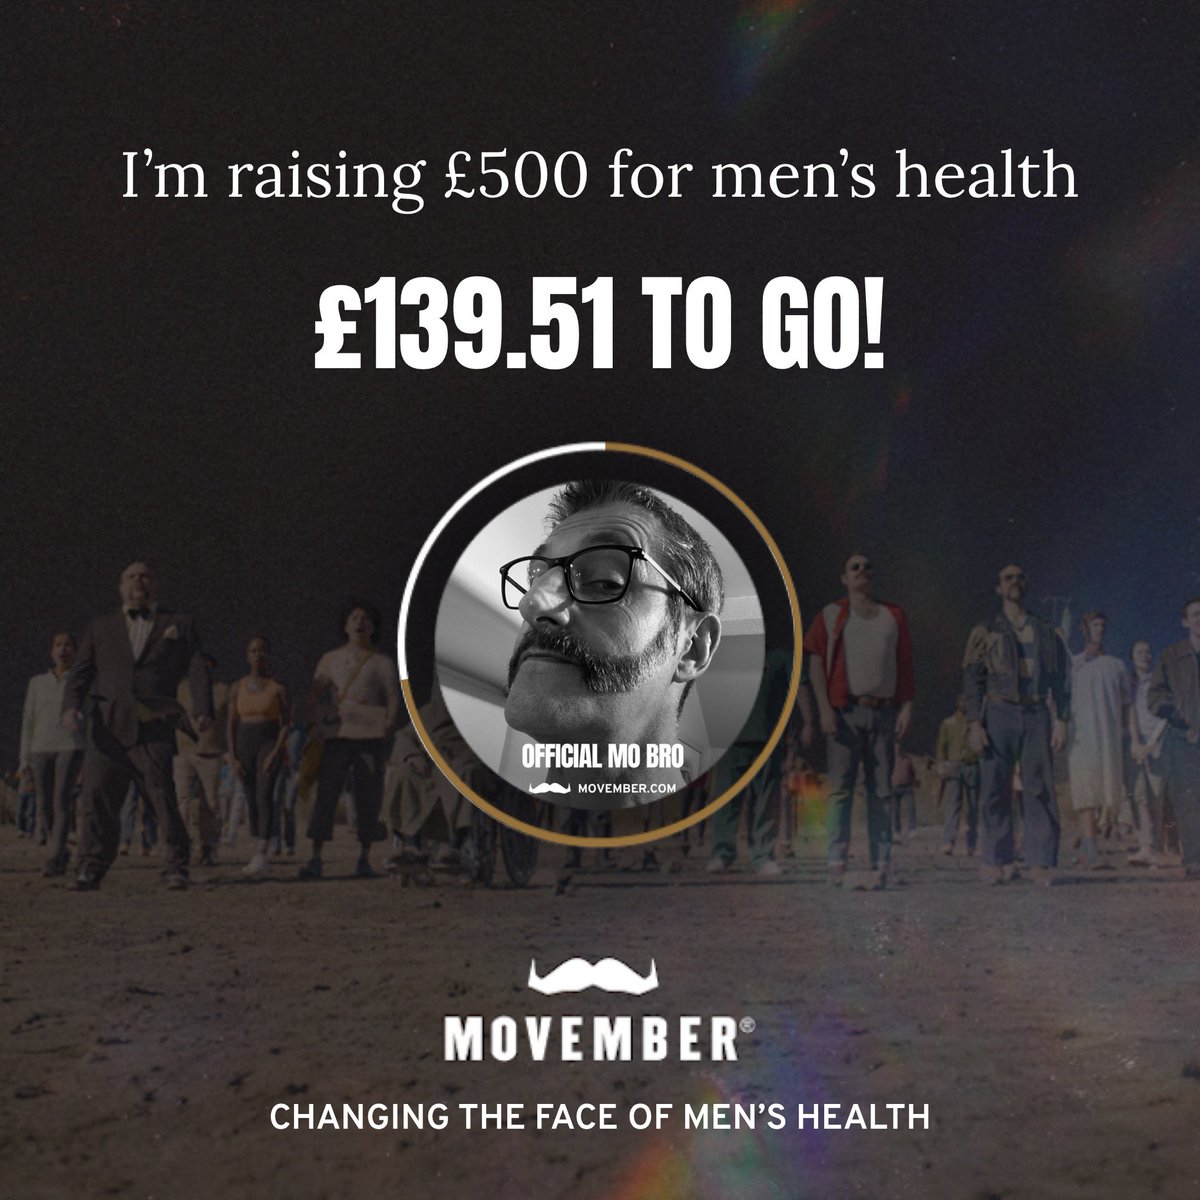 Half way there 🙌 I’ll be having a #Movember focus on suicide prevention during MHFAider delivery today in London. 👌 *still fund raising in the background 💰💵💶 #Savinglives